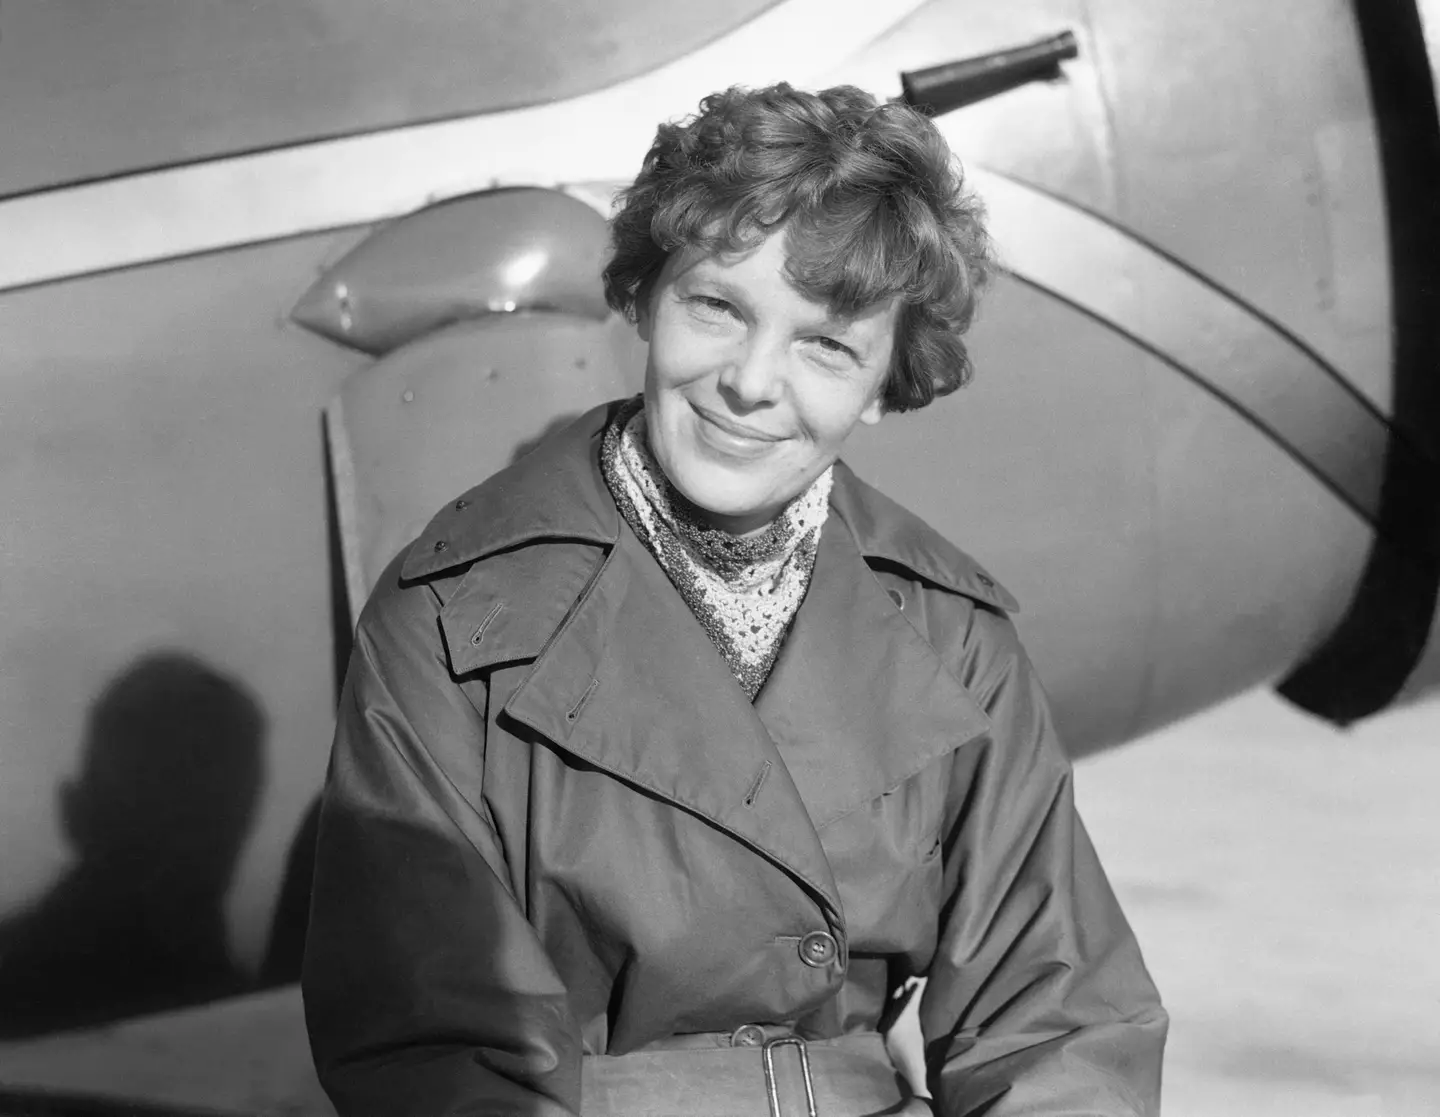 New evidence surrounding Amelia Earhart could solve her disappearance.